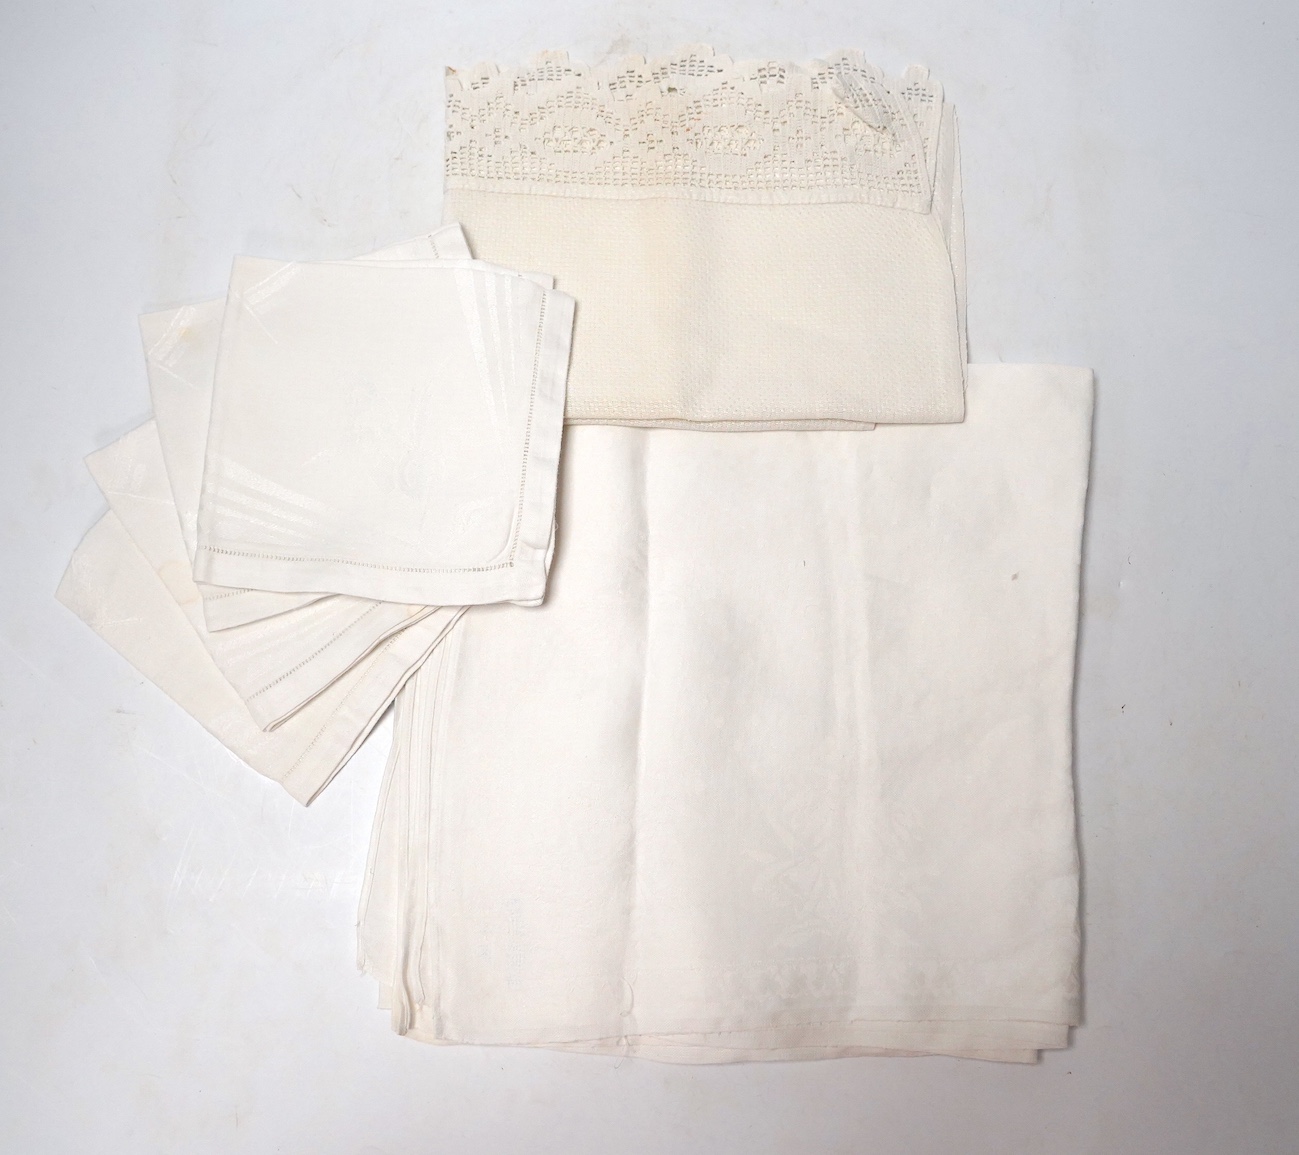 A collection of linen hand towels, table mats, etc. Condition - all laundered and appear in good condition